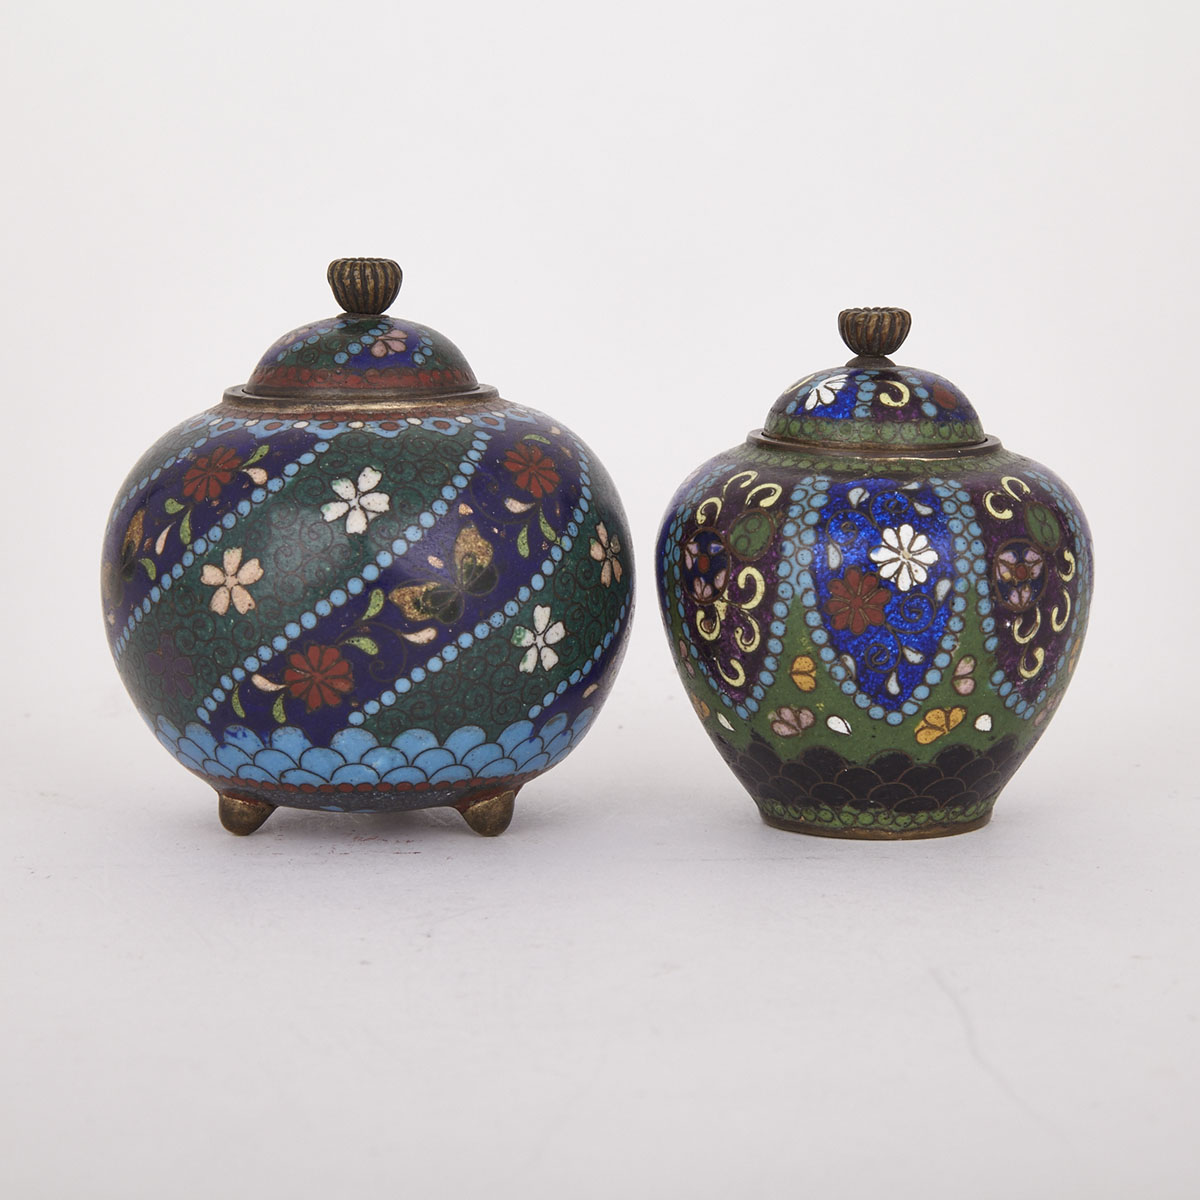 Two Small Cloisonne Covered Vessels